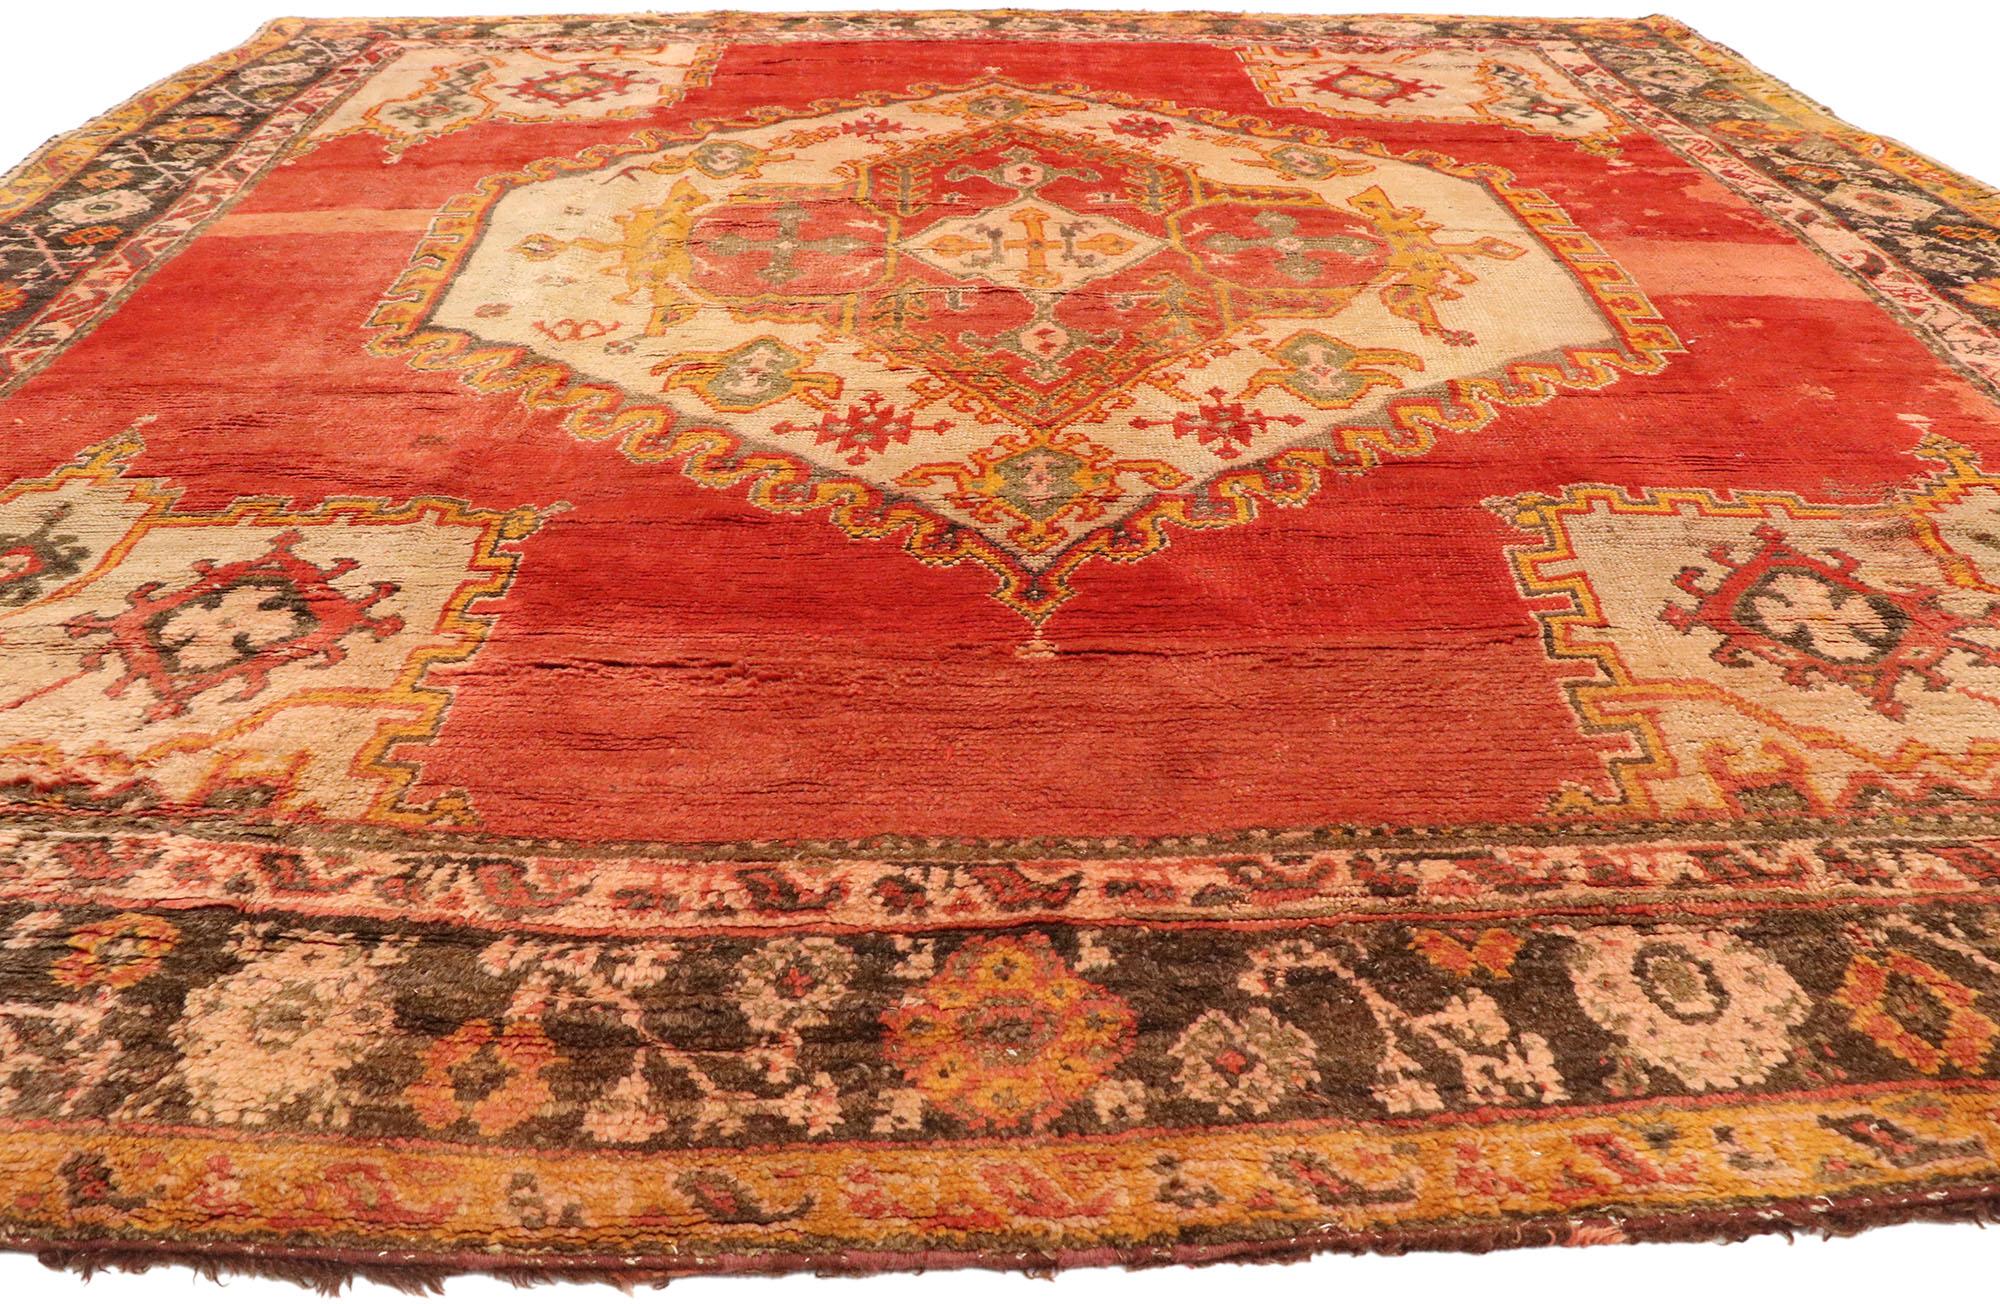 Antique Turkish Oushak Rug  In Good Condition For Sale In Dallas, TX